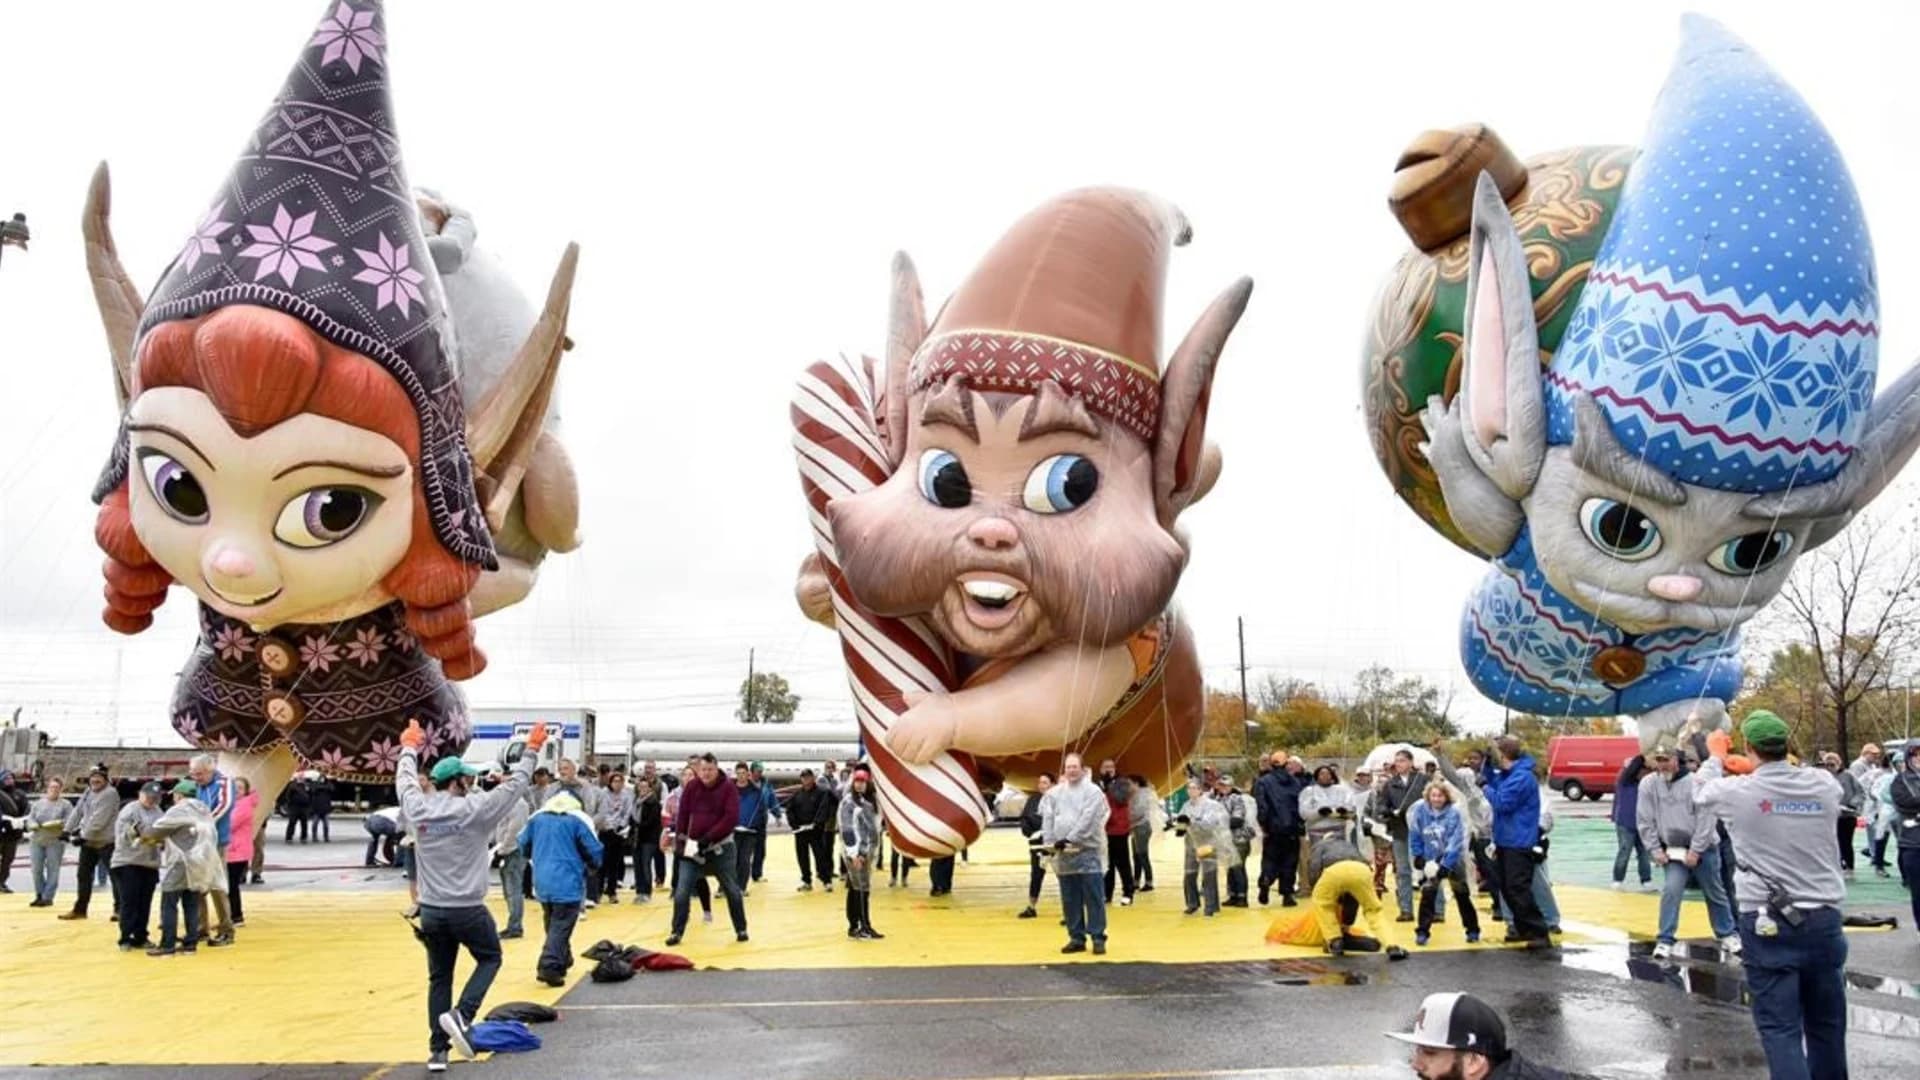 Preview balloons in the 2018 Macy's Thanksgiving Day Parade